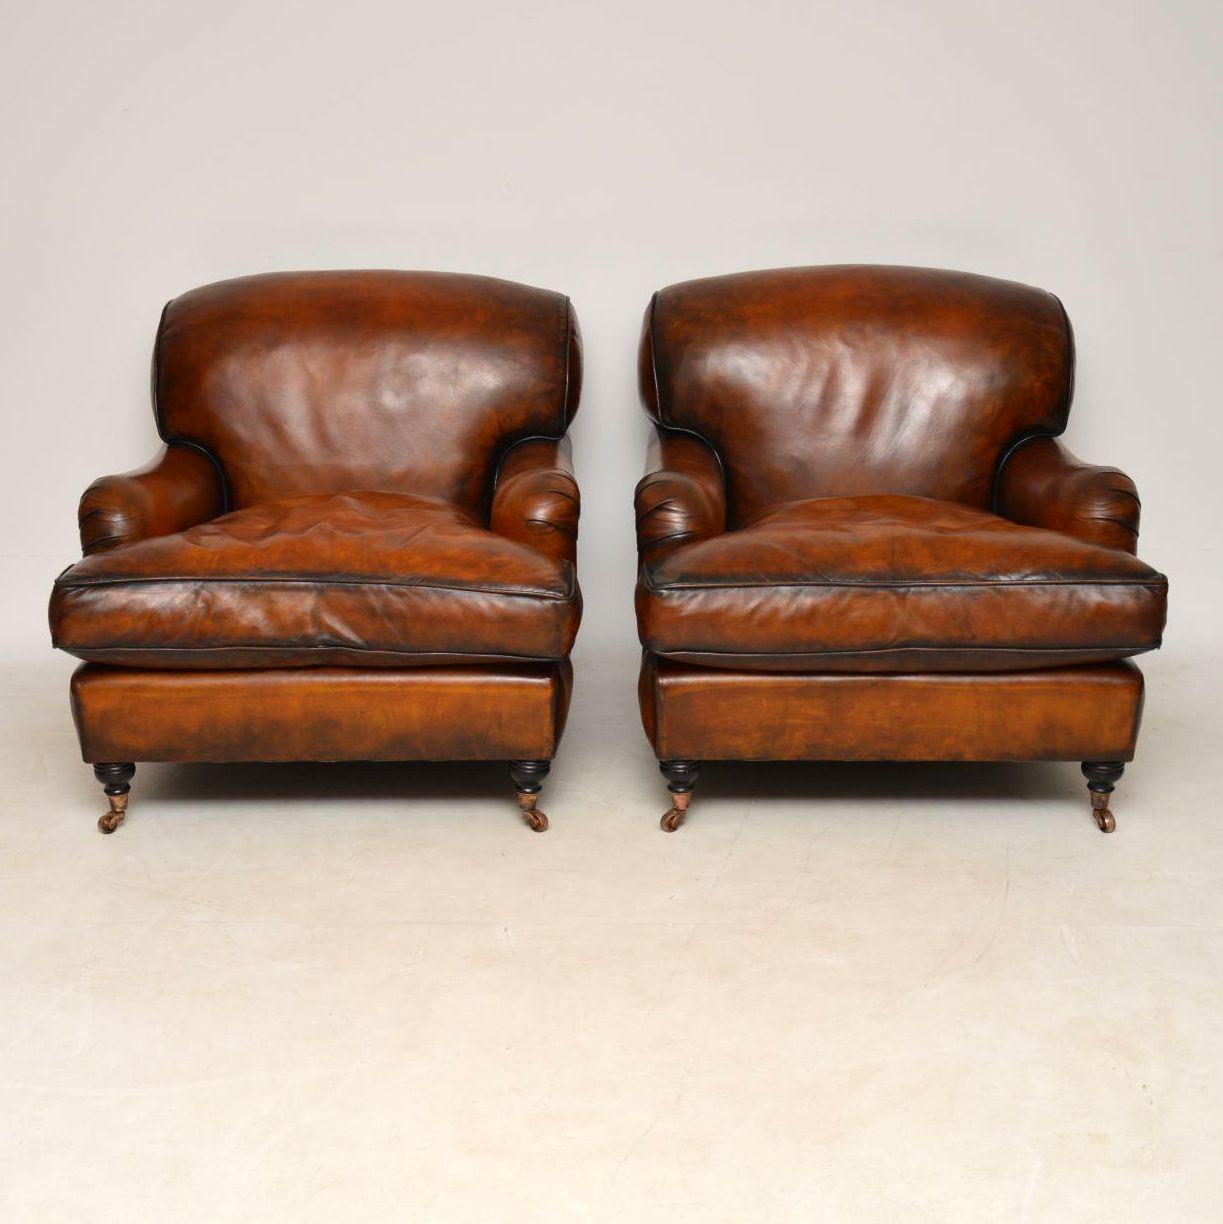 Large pair of leather antique ‘Howard’ style armchairs in wonderful condition and extremely comfortable. The leather is a wonderful colour with loads of character and a great antique look. These armchairs are in excellent condition and I would say